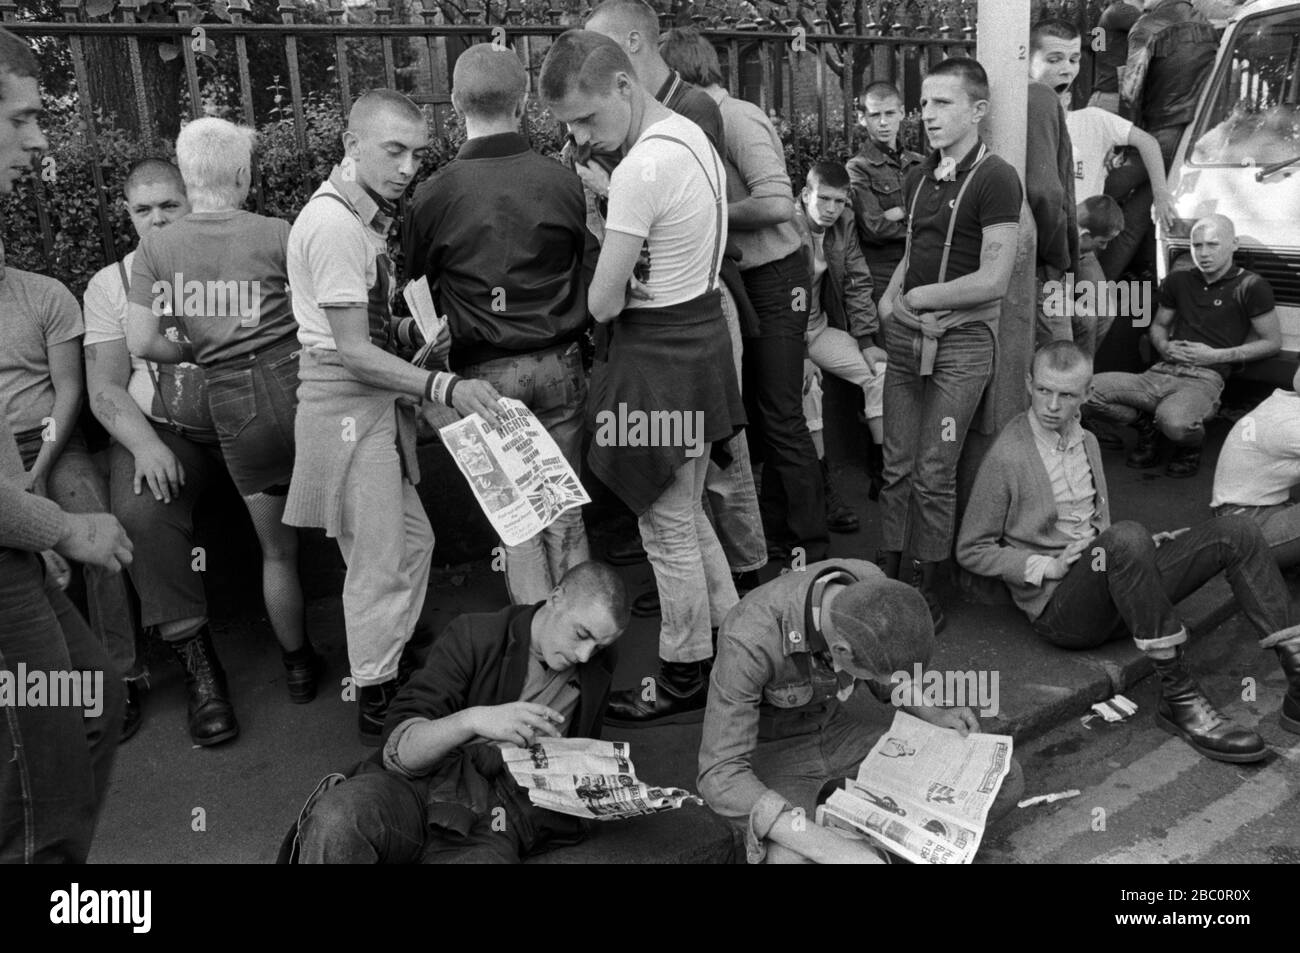 Skinheads London 1980s UK. A group of National Front young male supporters. Wear short jeans and braces, fashionable at the time. The poster leaflet being handed out reads 'Defend Our Rights, Join the National Front March. London Sunday August 30th 1981 HOMER SYKES Stock Photo